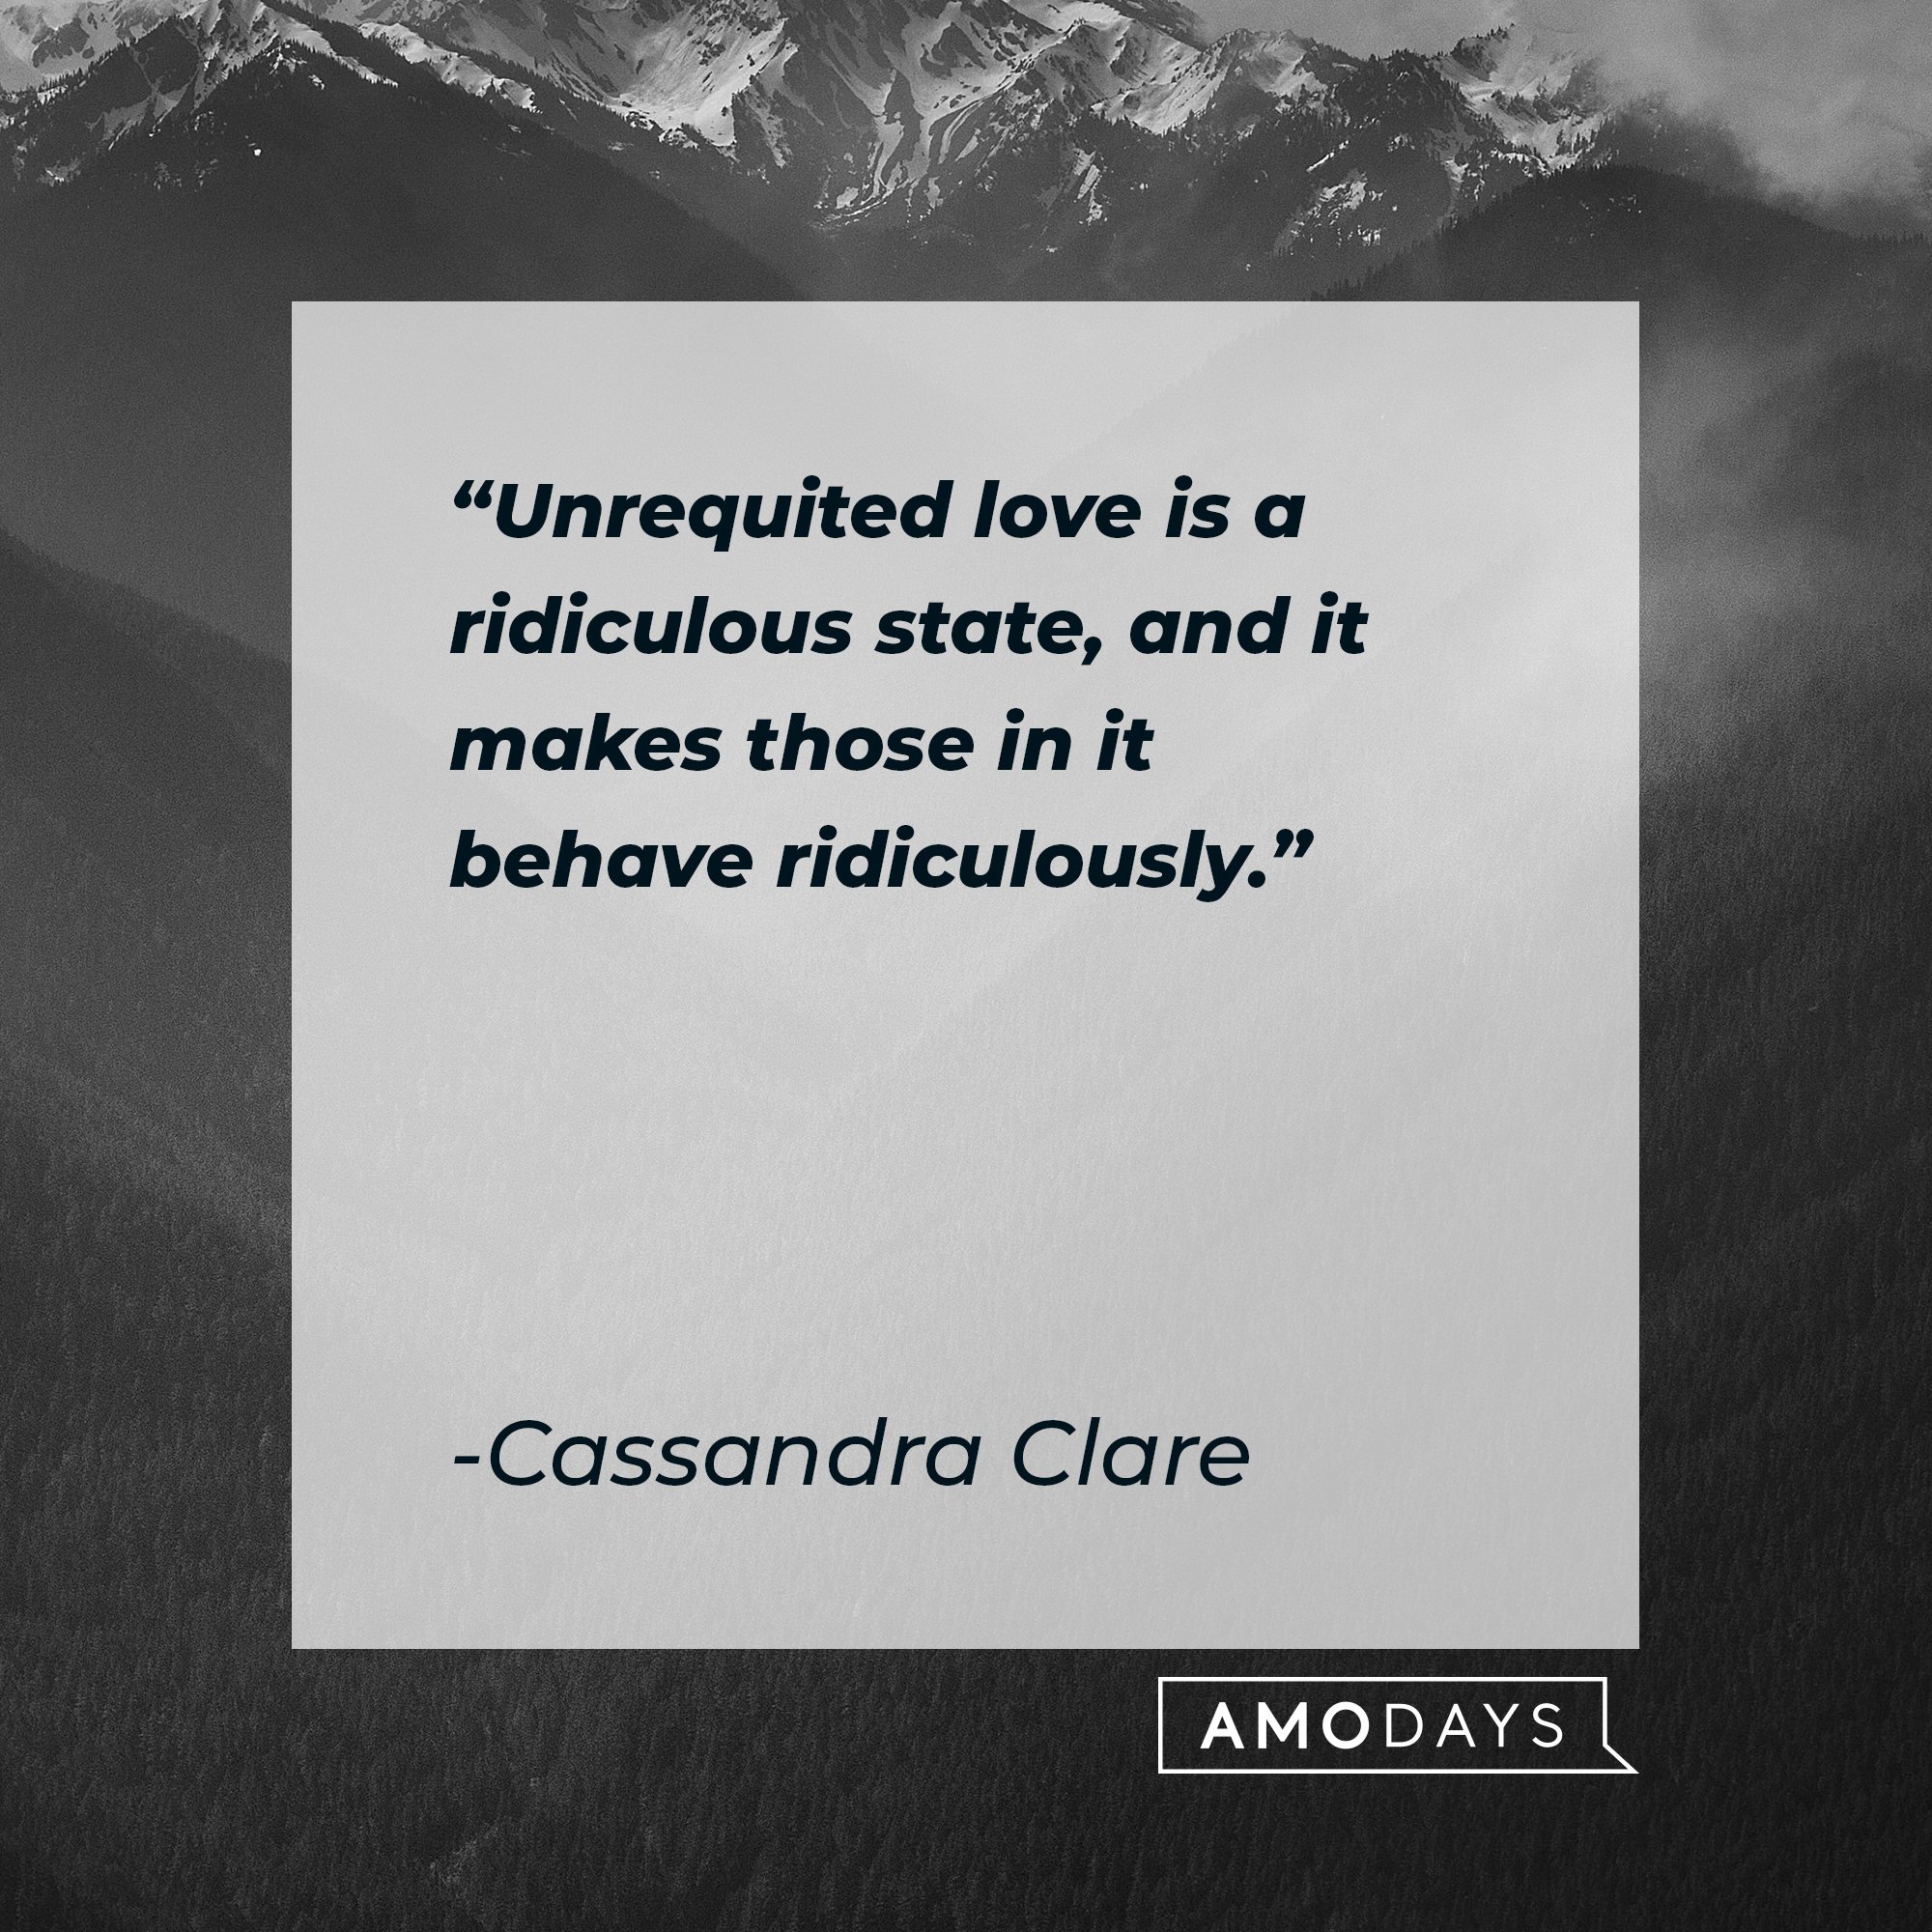 Cassandra Clare’s quote: "Unrequited love is a ridiculous state, and it makes those in it behave ridiculously." | Image: AmoDays